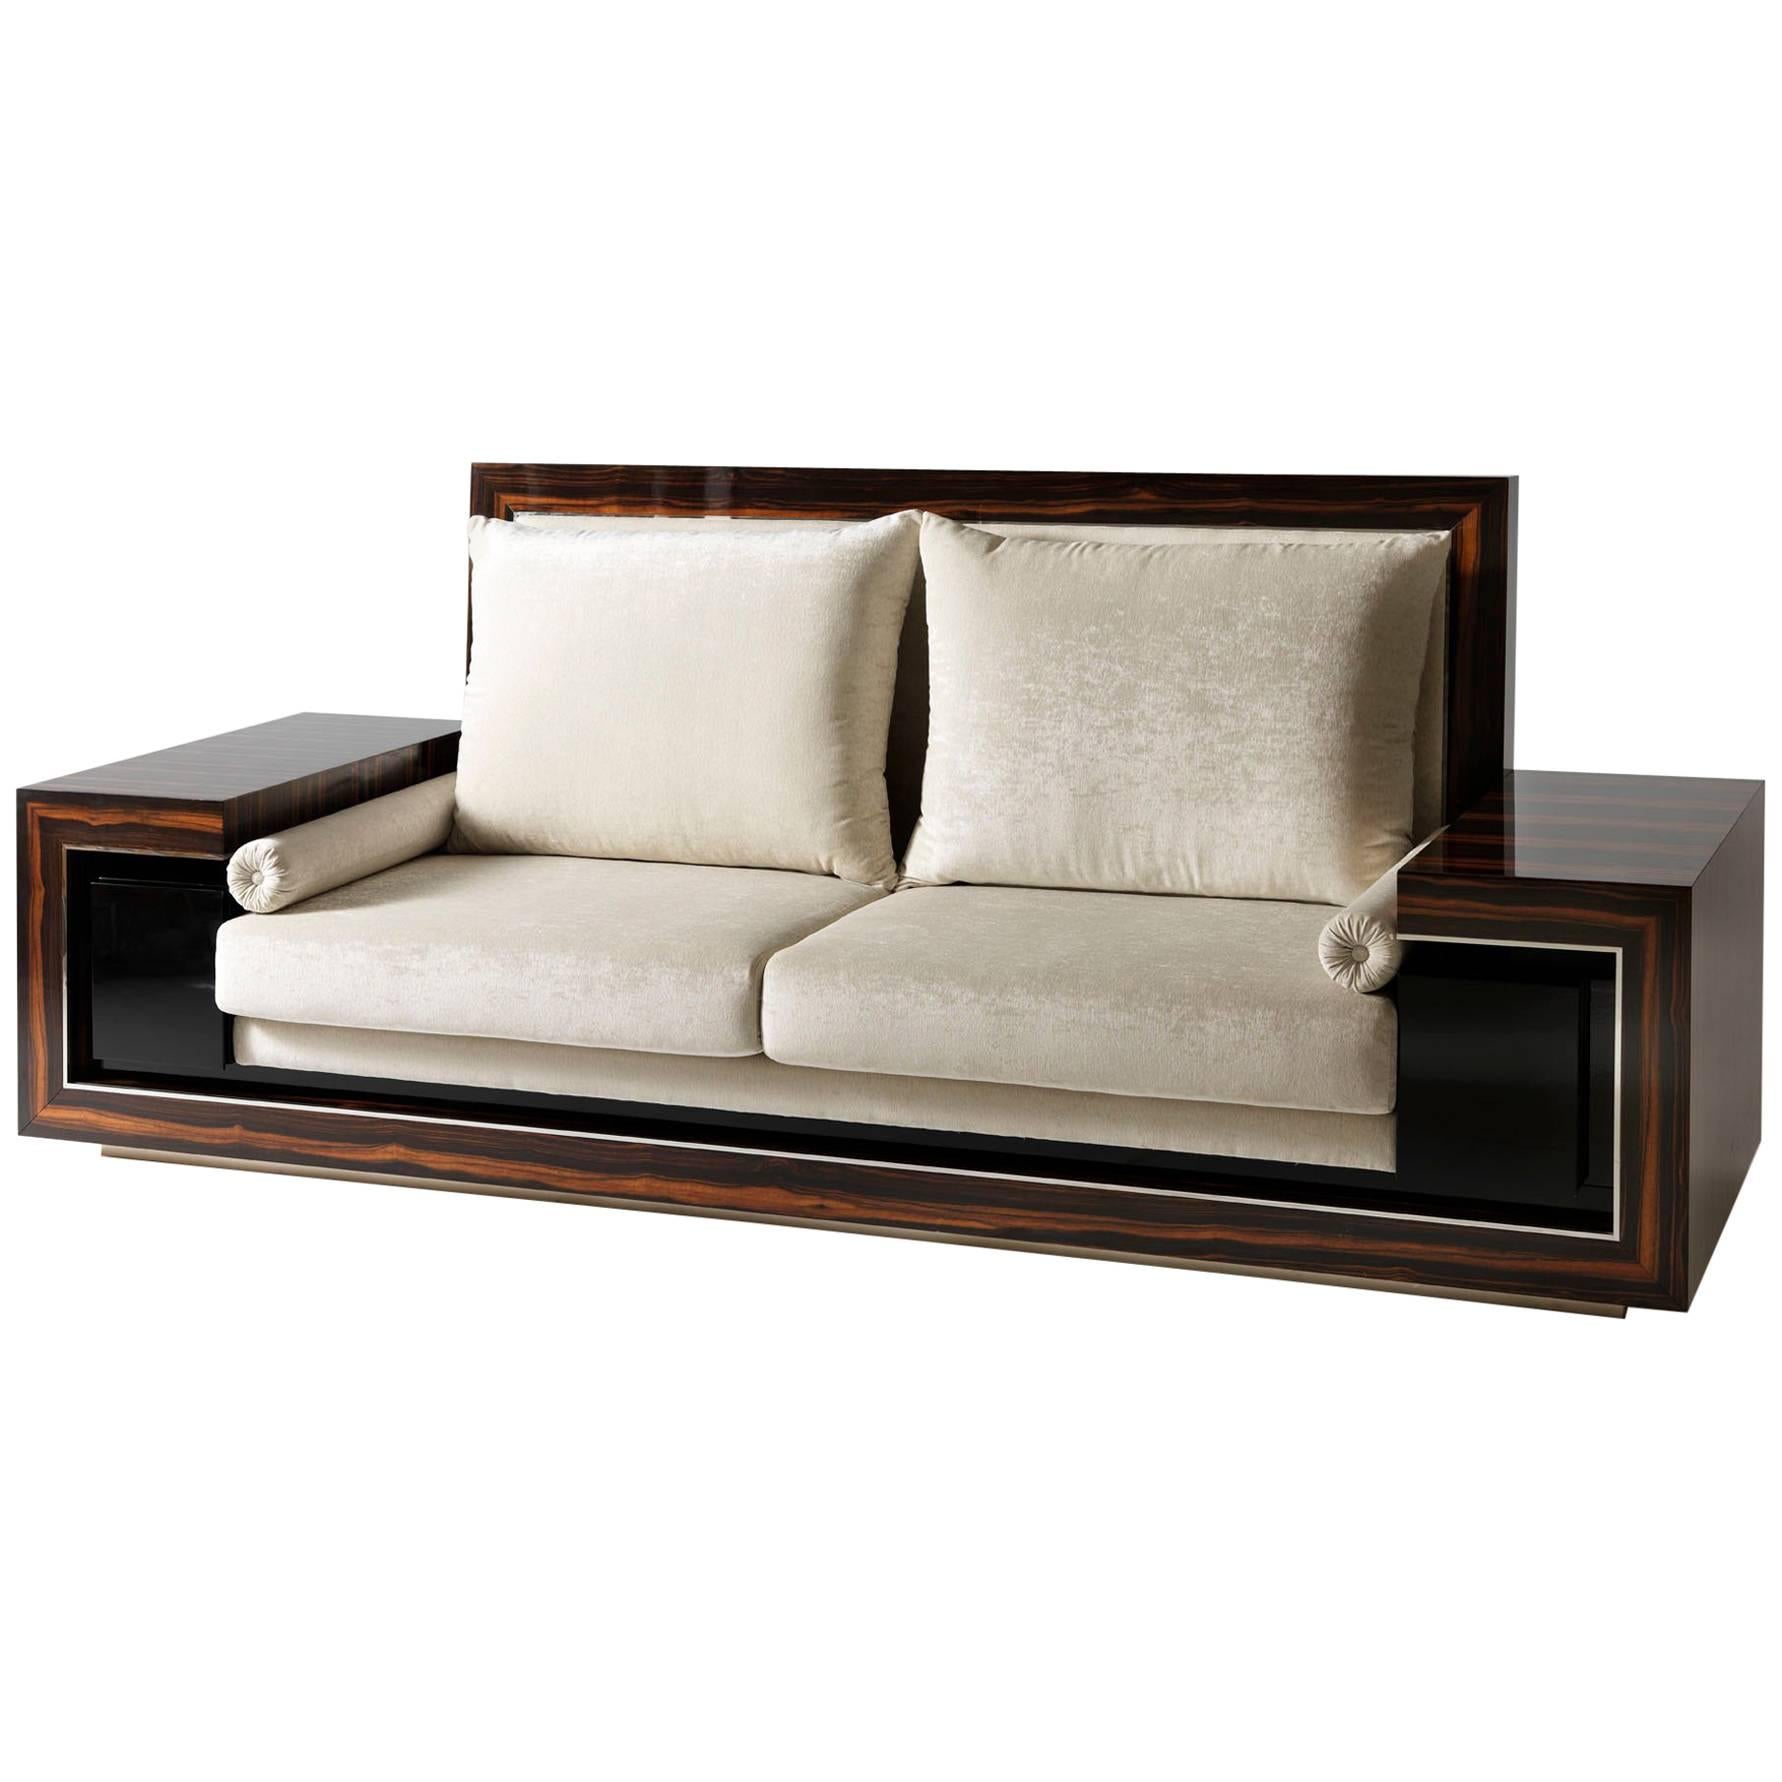 Macassar Ebony Wood Sofa in Art Deco Style, Handmade in Italy by Master Artisans For Sale